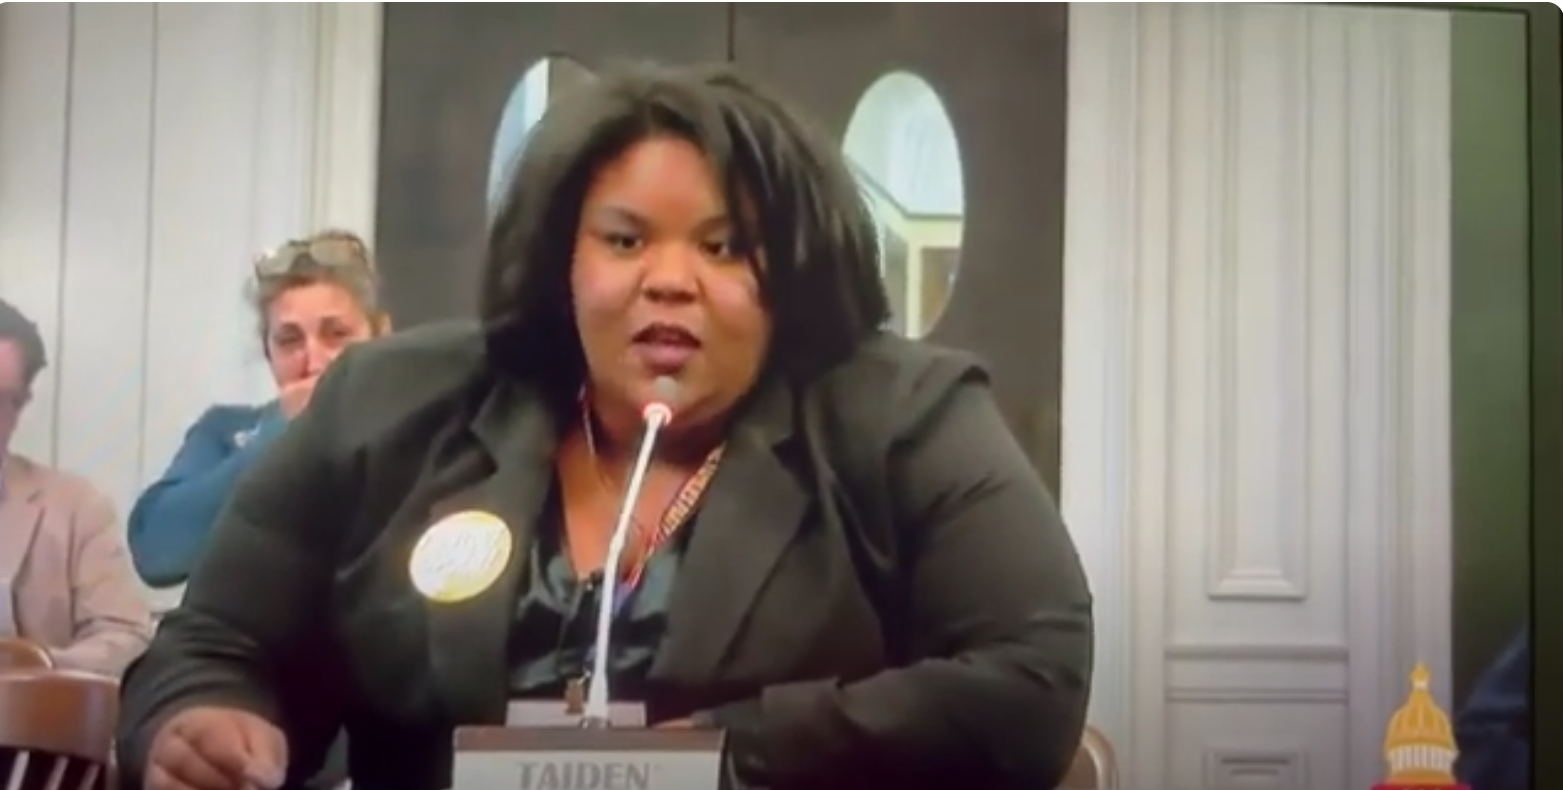 NJ Voices For Democracy Clip 3: Antoinette Miles – Working Families Party- Speaking out on Sarlo and Danielsen’s Attempt to Destroy the Open Public Records Act